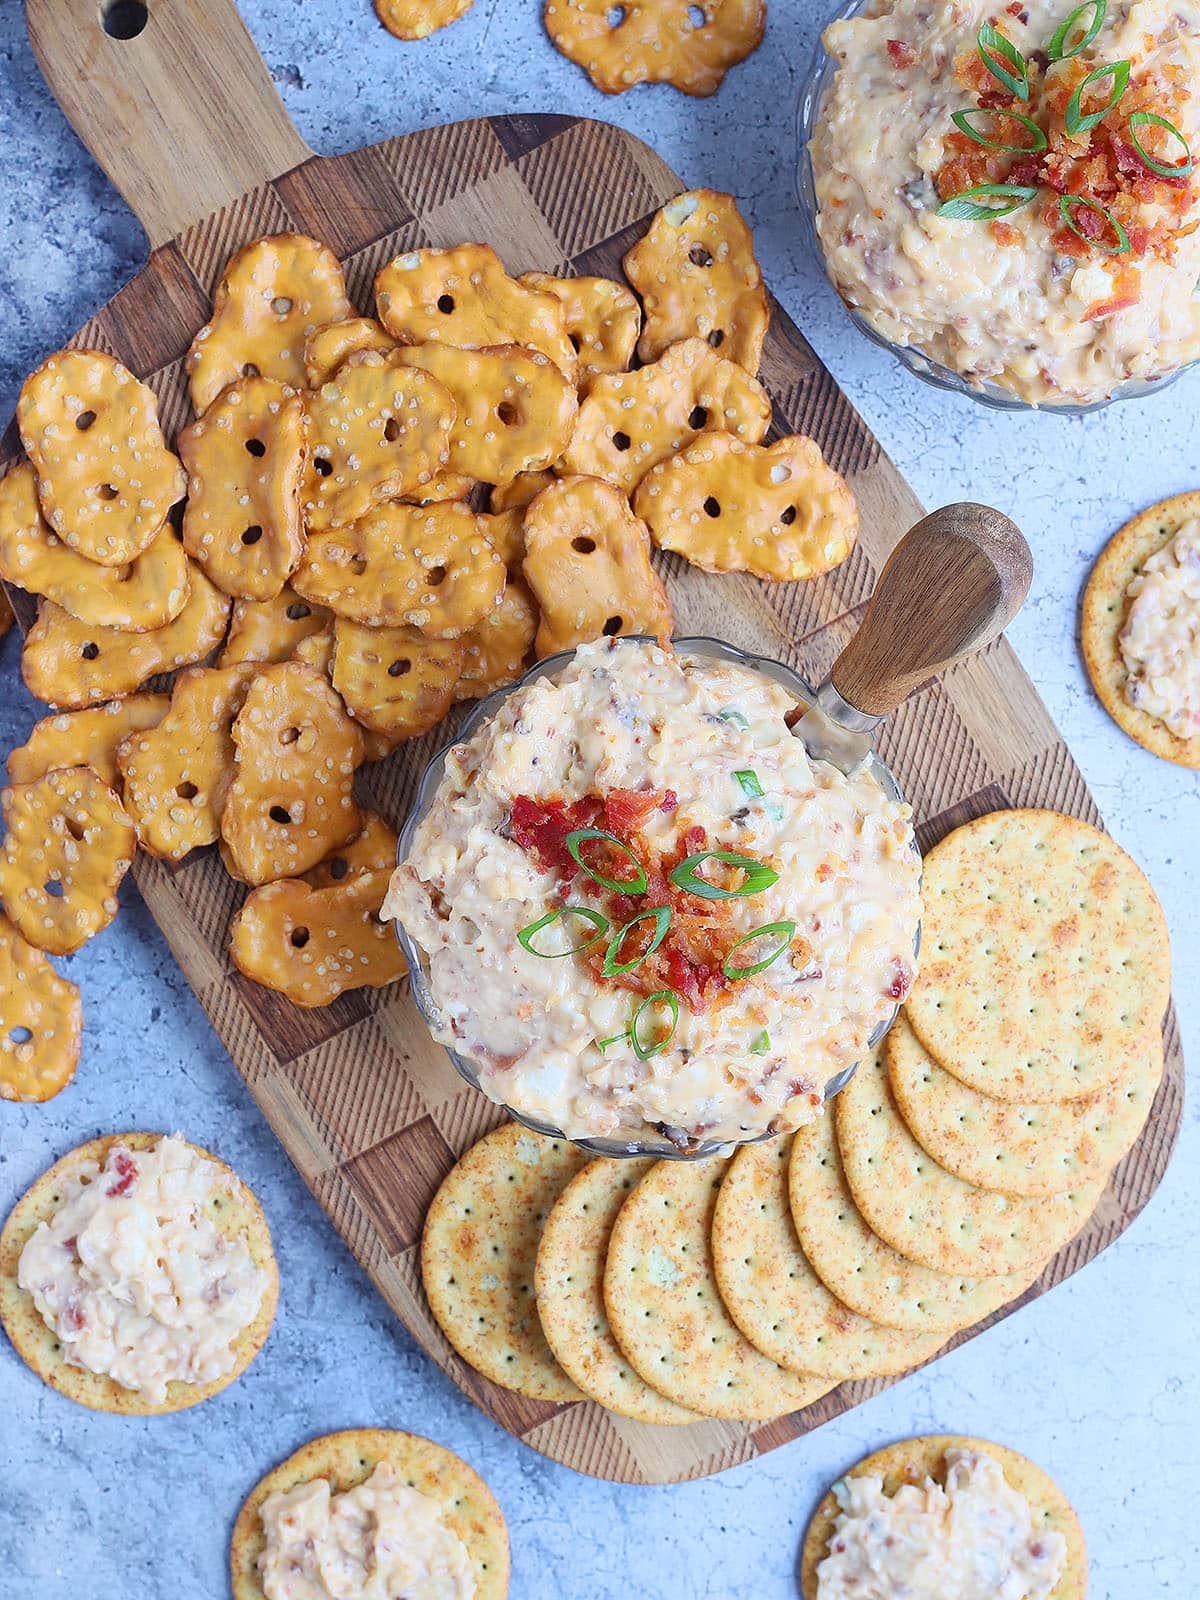 Dish of spicy pimento cheese topped with chopped bacon and green onions surrounded by pretzels and crackers.